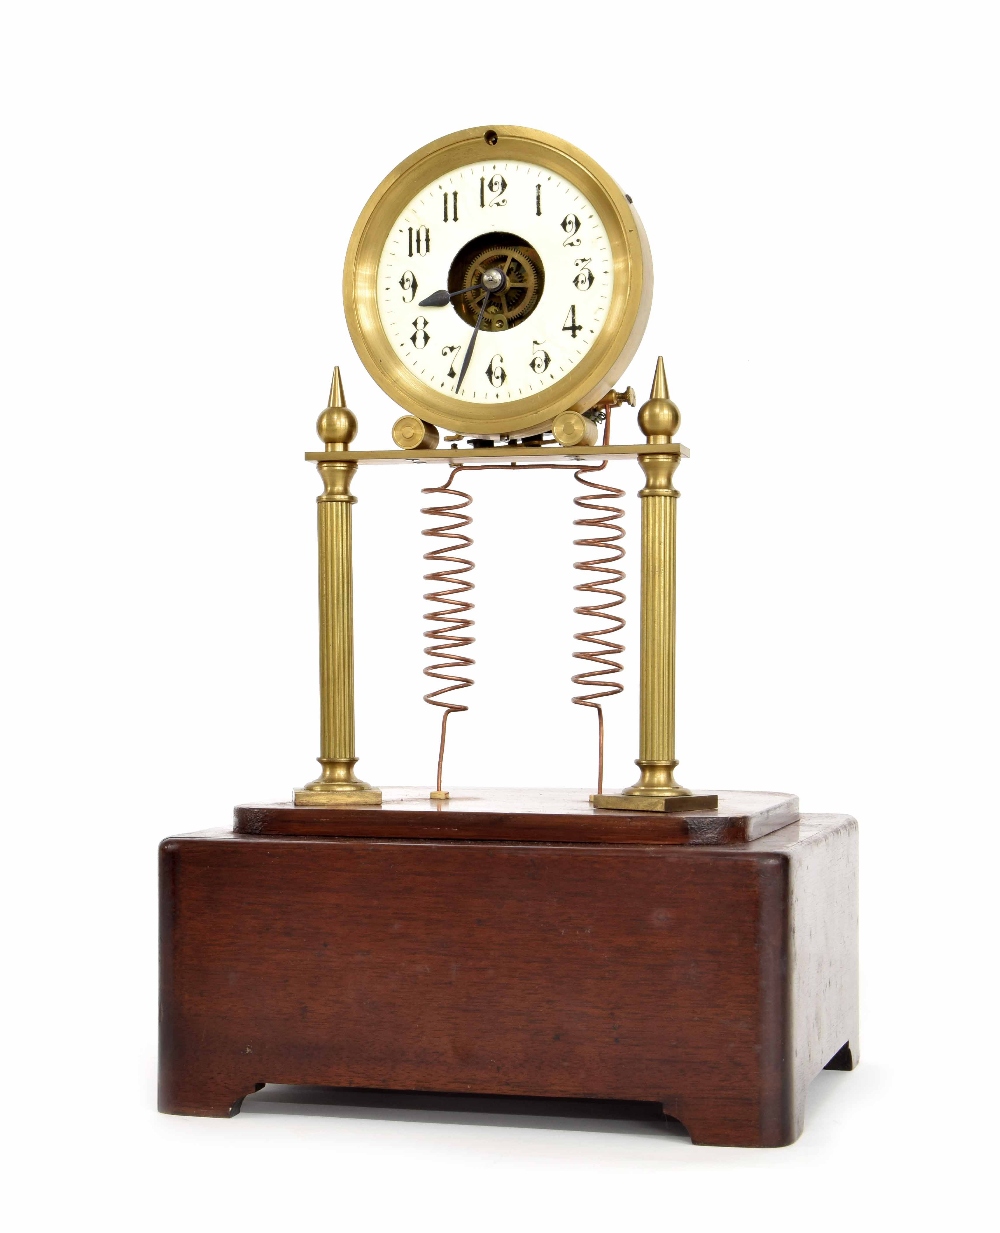 Unusual early French electric clock, the skeletonised enamelled 4" dial with Arabic numerals being